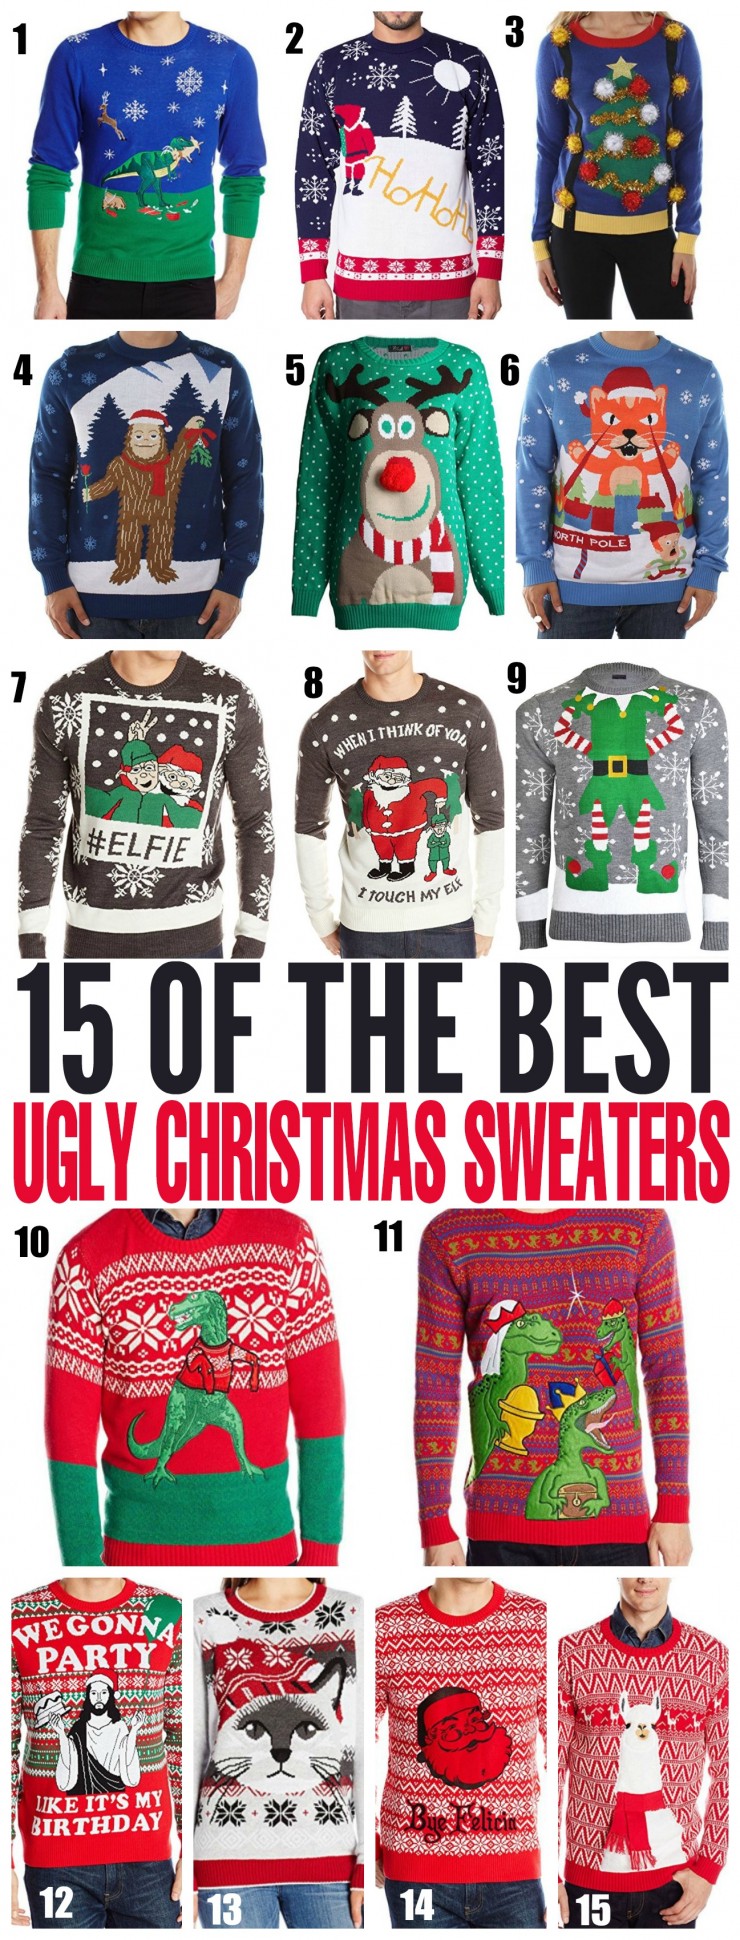  Ugly Christmas sweaters are a huge thing during the holidays, from ugly christmas sweater parties to family Christmas dinner. Check out 15 Of The Best Ugly Christmas Sweaters You Can Get On Amazon!